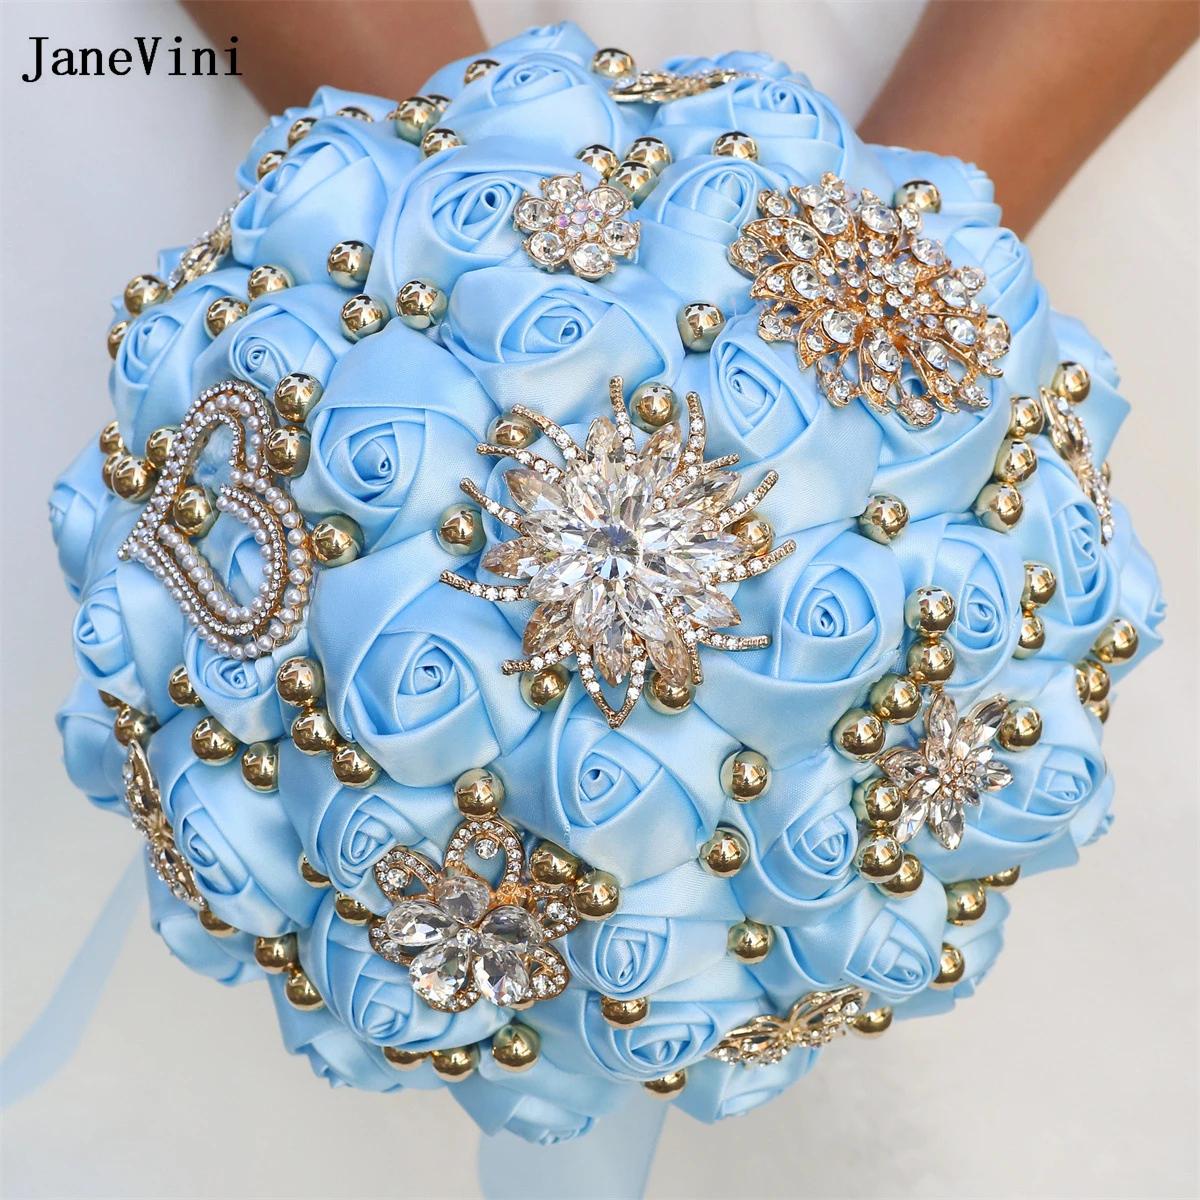 

JaneVini Charming Light Blue Ribbon Flowers Bridal Bouquets Luxury Pearls Crystal Artificial Satin Roses Wedding Brooch Bouquet